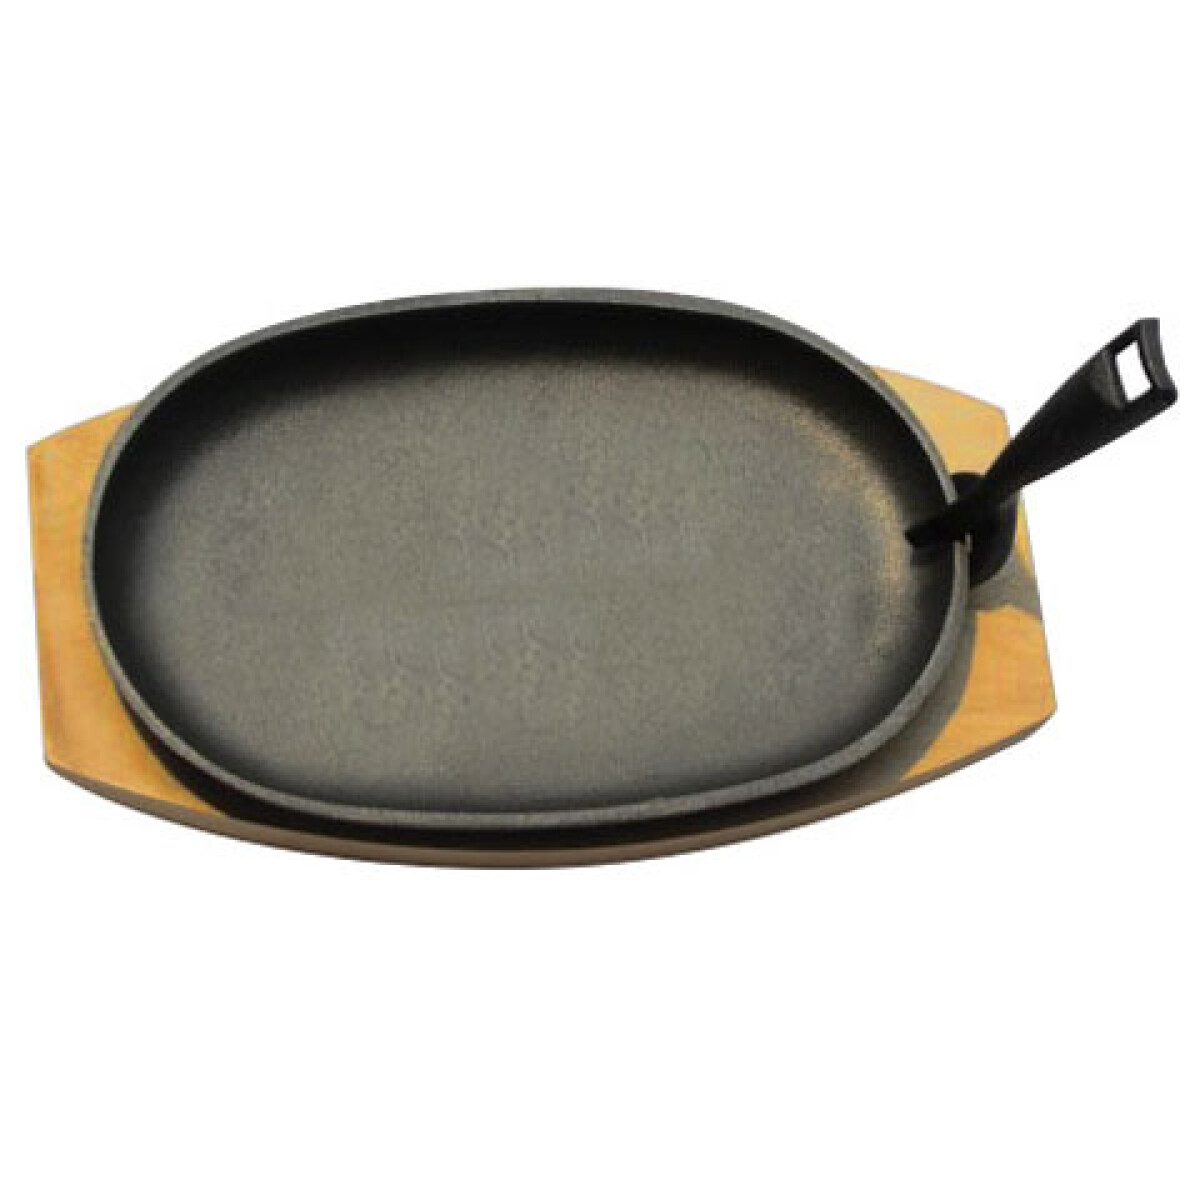 PLANCHA GRIL OVAL HIERRO C/ BASE MADER. D24x14CM 